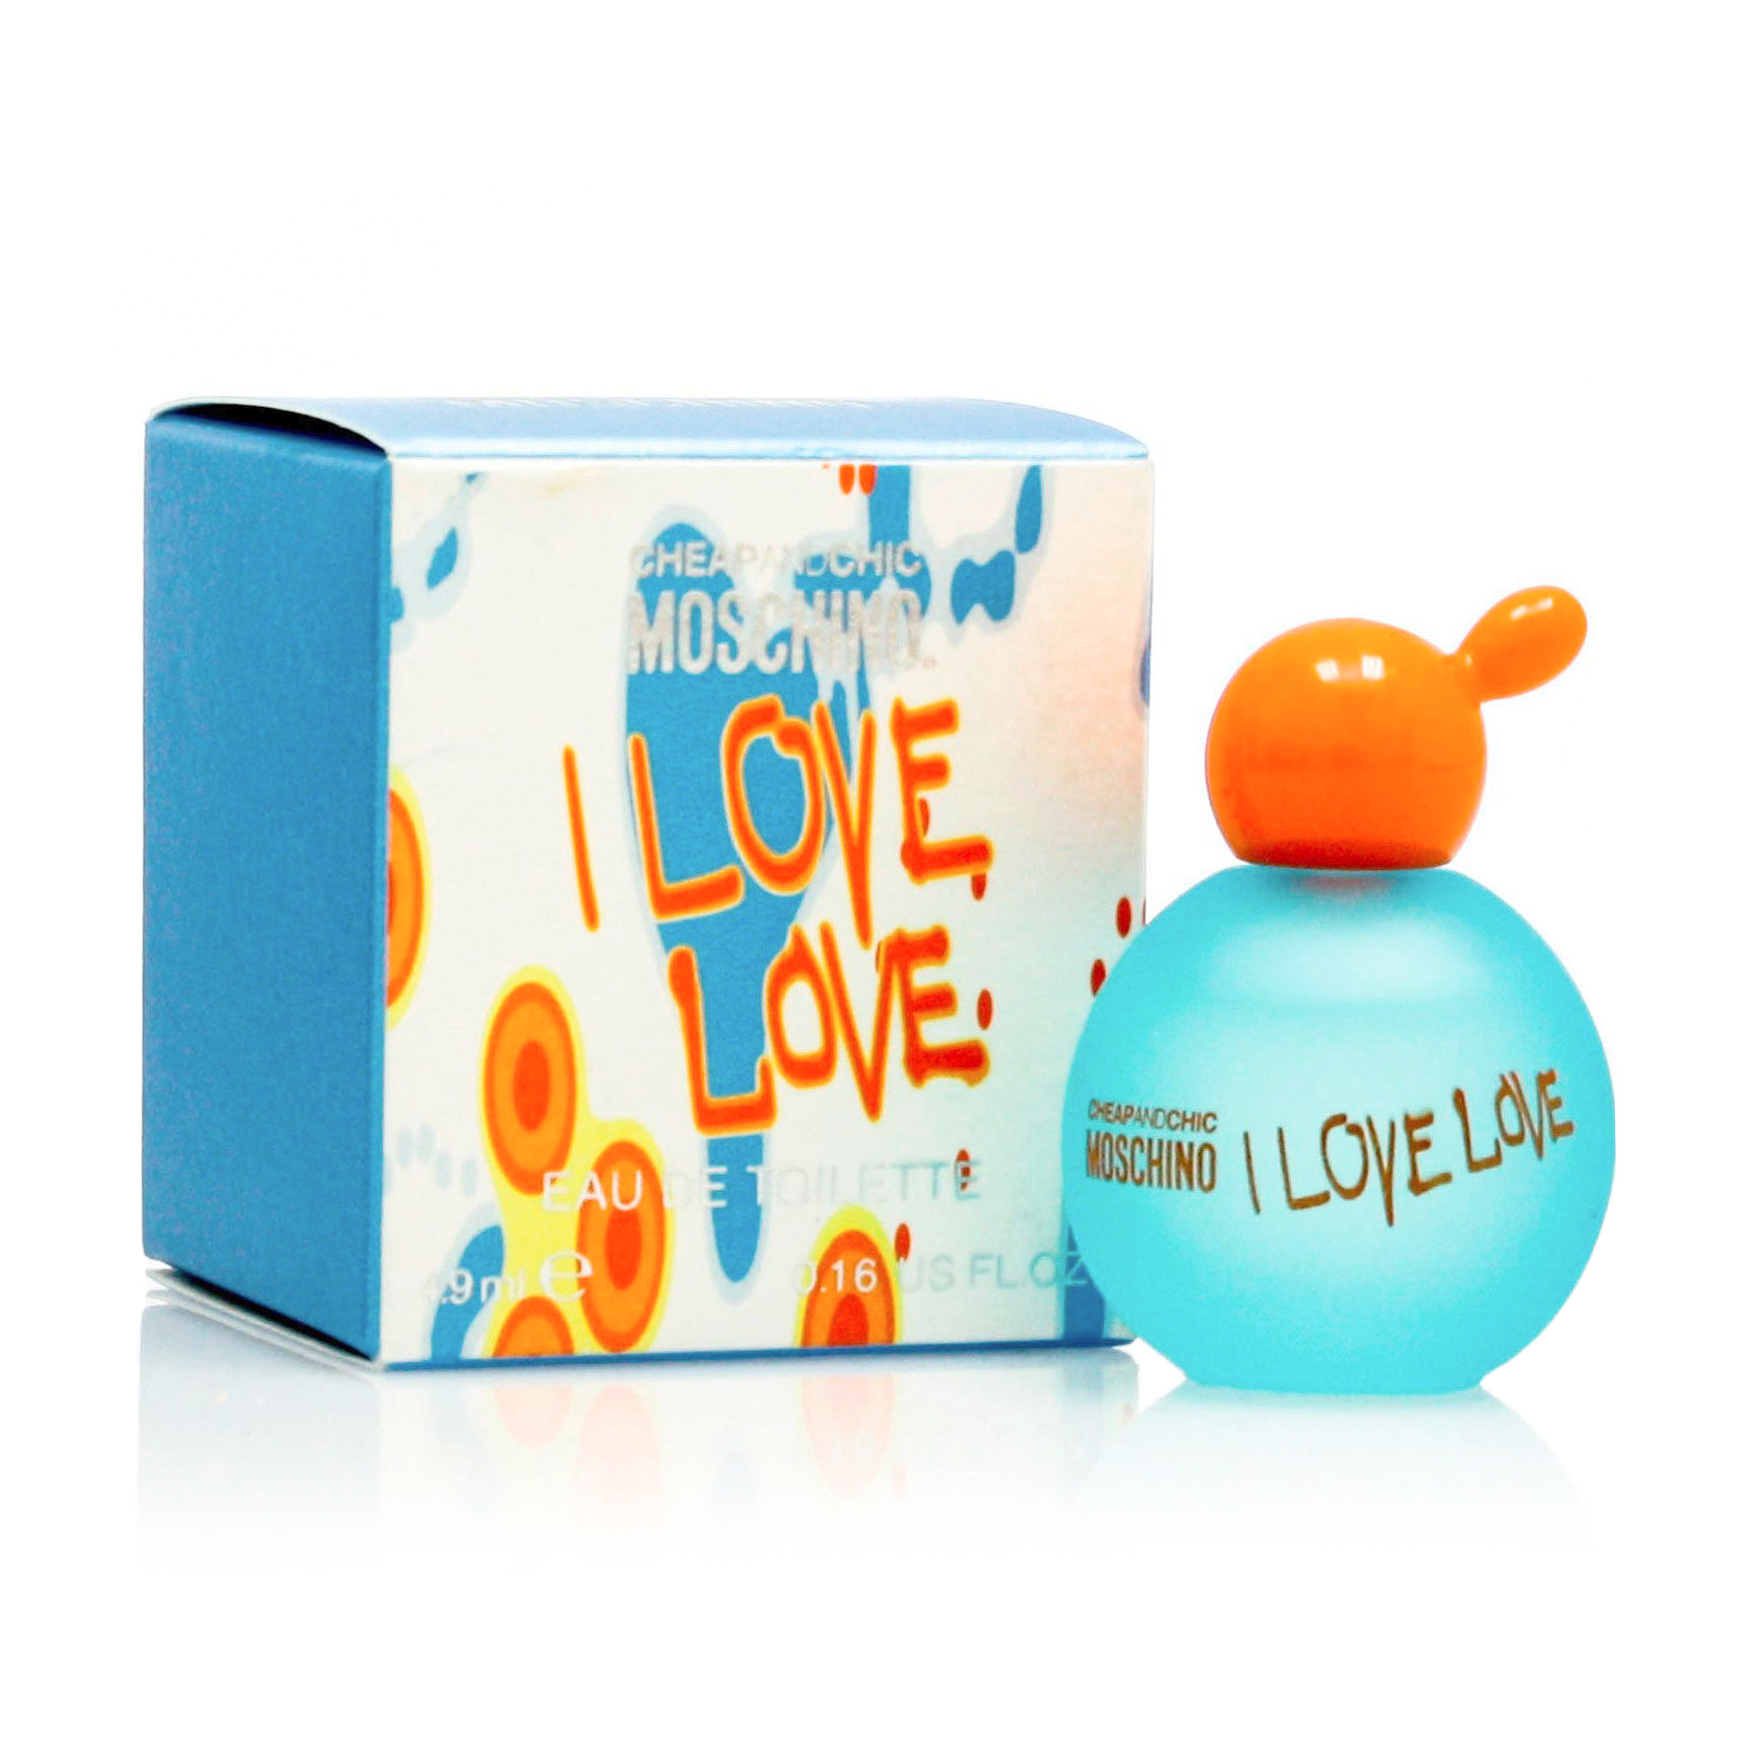 4 first love. Moschino i Love Love Lady 5ml EDT Mini. Moschino cheap and Chic i Love Love 4,9 мл. Moschino cheap&Chic i Love Love w EDT 30 ml [m]. Moschino c&c i Love Love Eau de Toilette 4.9мл Mini жен..